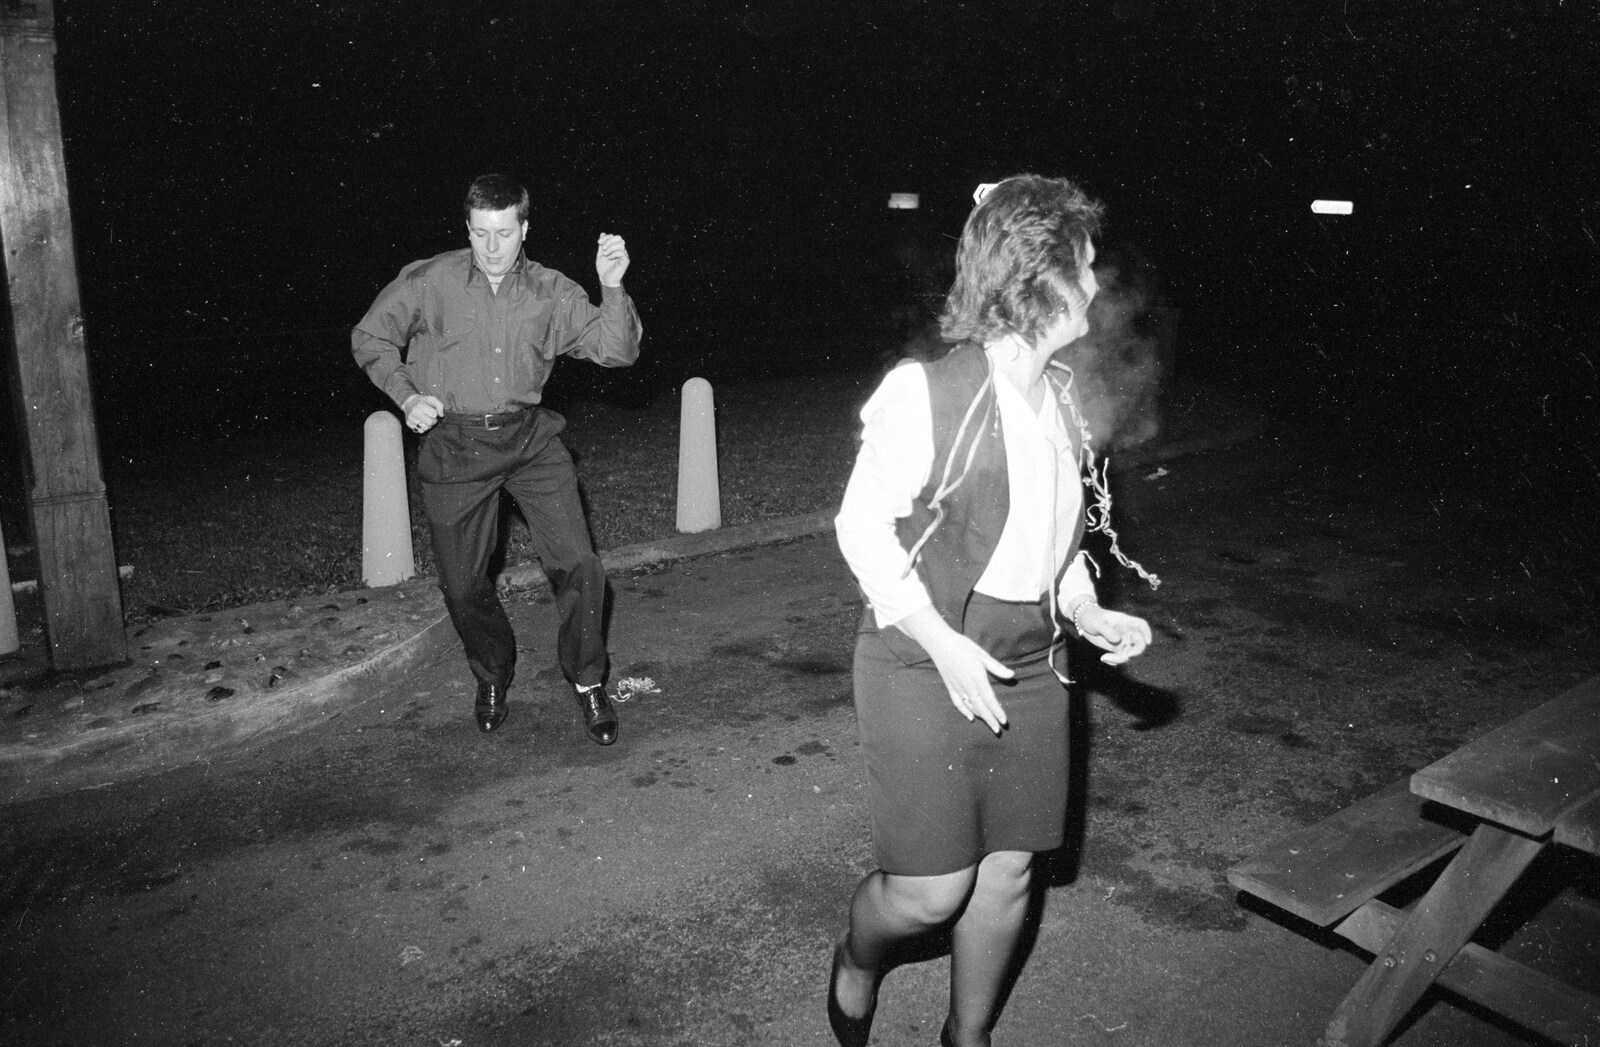 Barry and Davina dance around outside from New Year's Eve at the Swan Inn, Brome, Suffolk - 31st December 1992